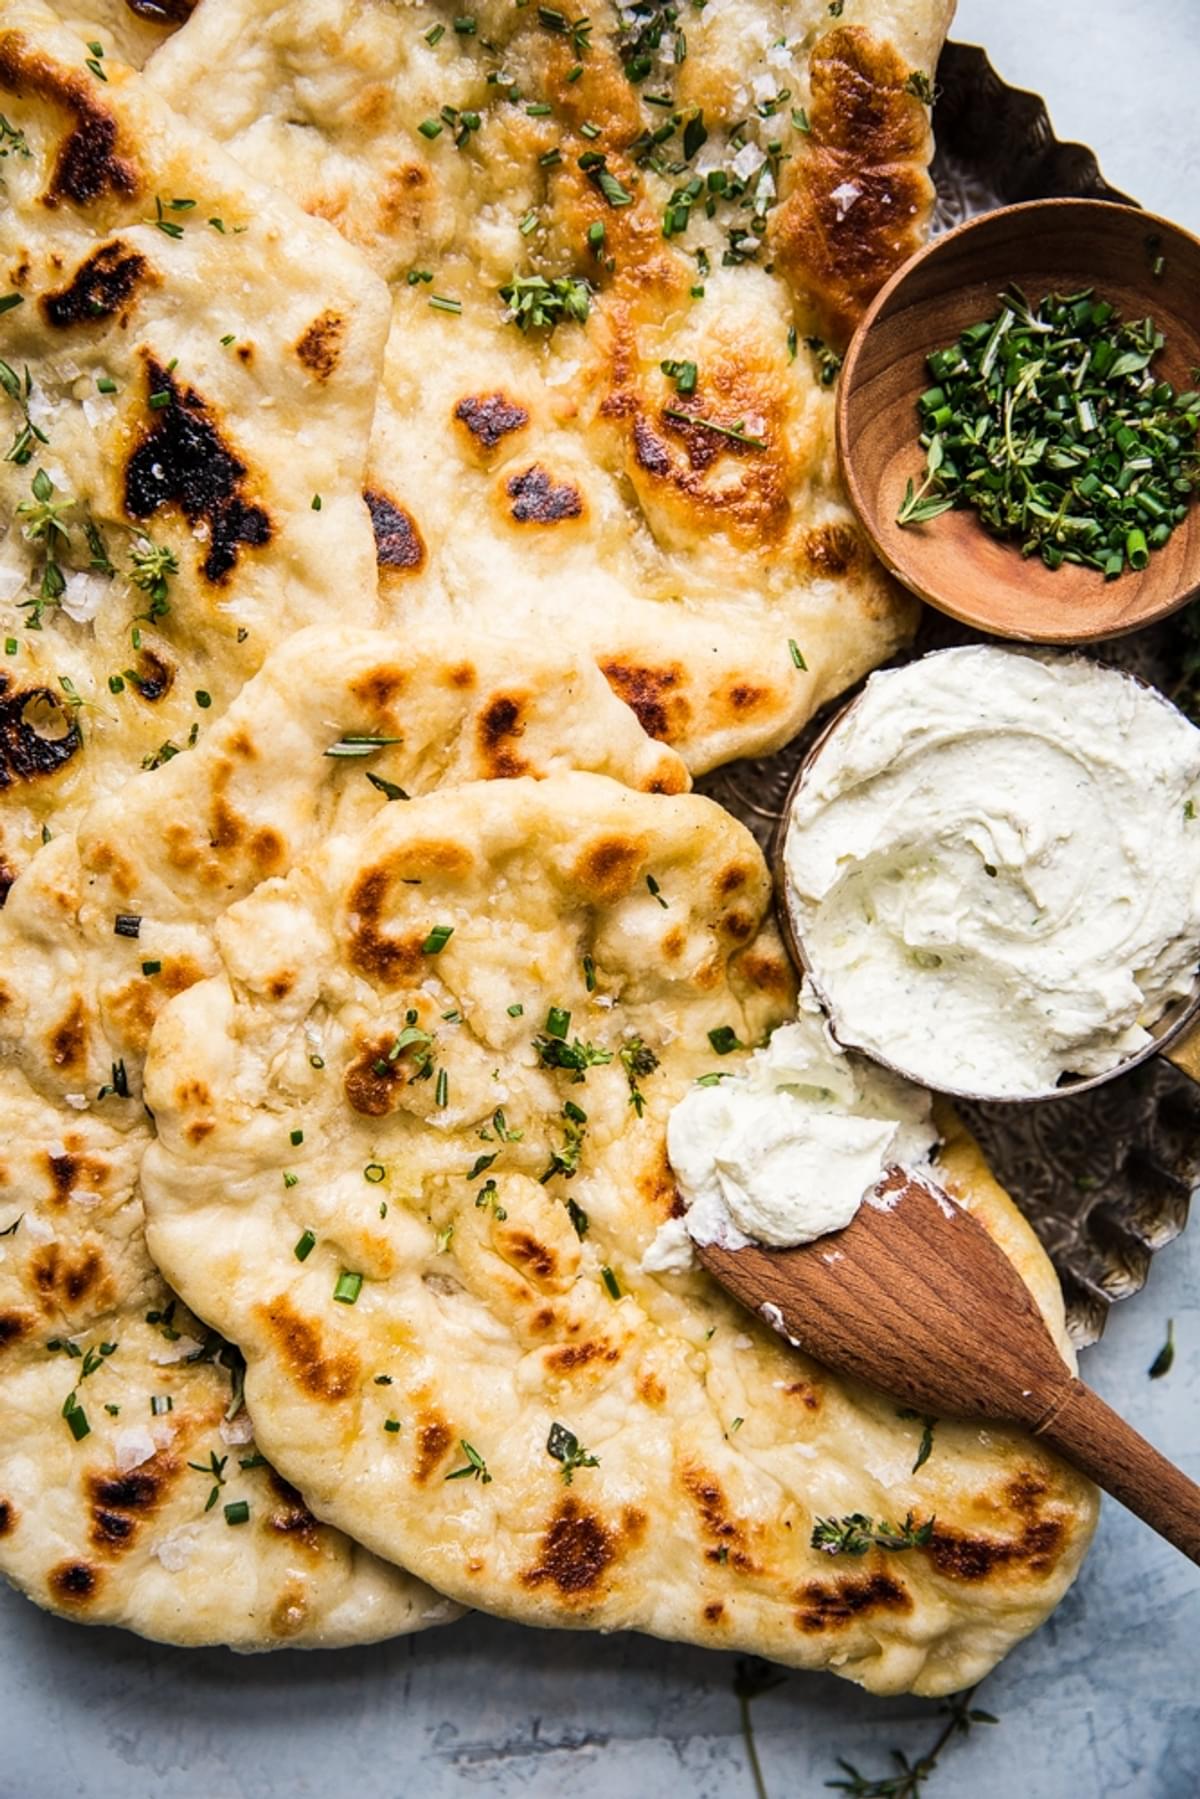 Herbed homemade flat bread with whipped feta cheese spread on a serving plate